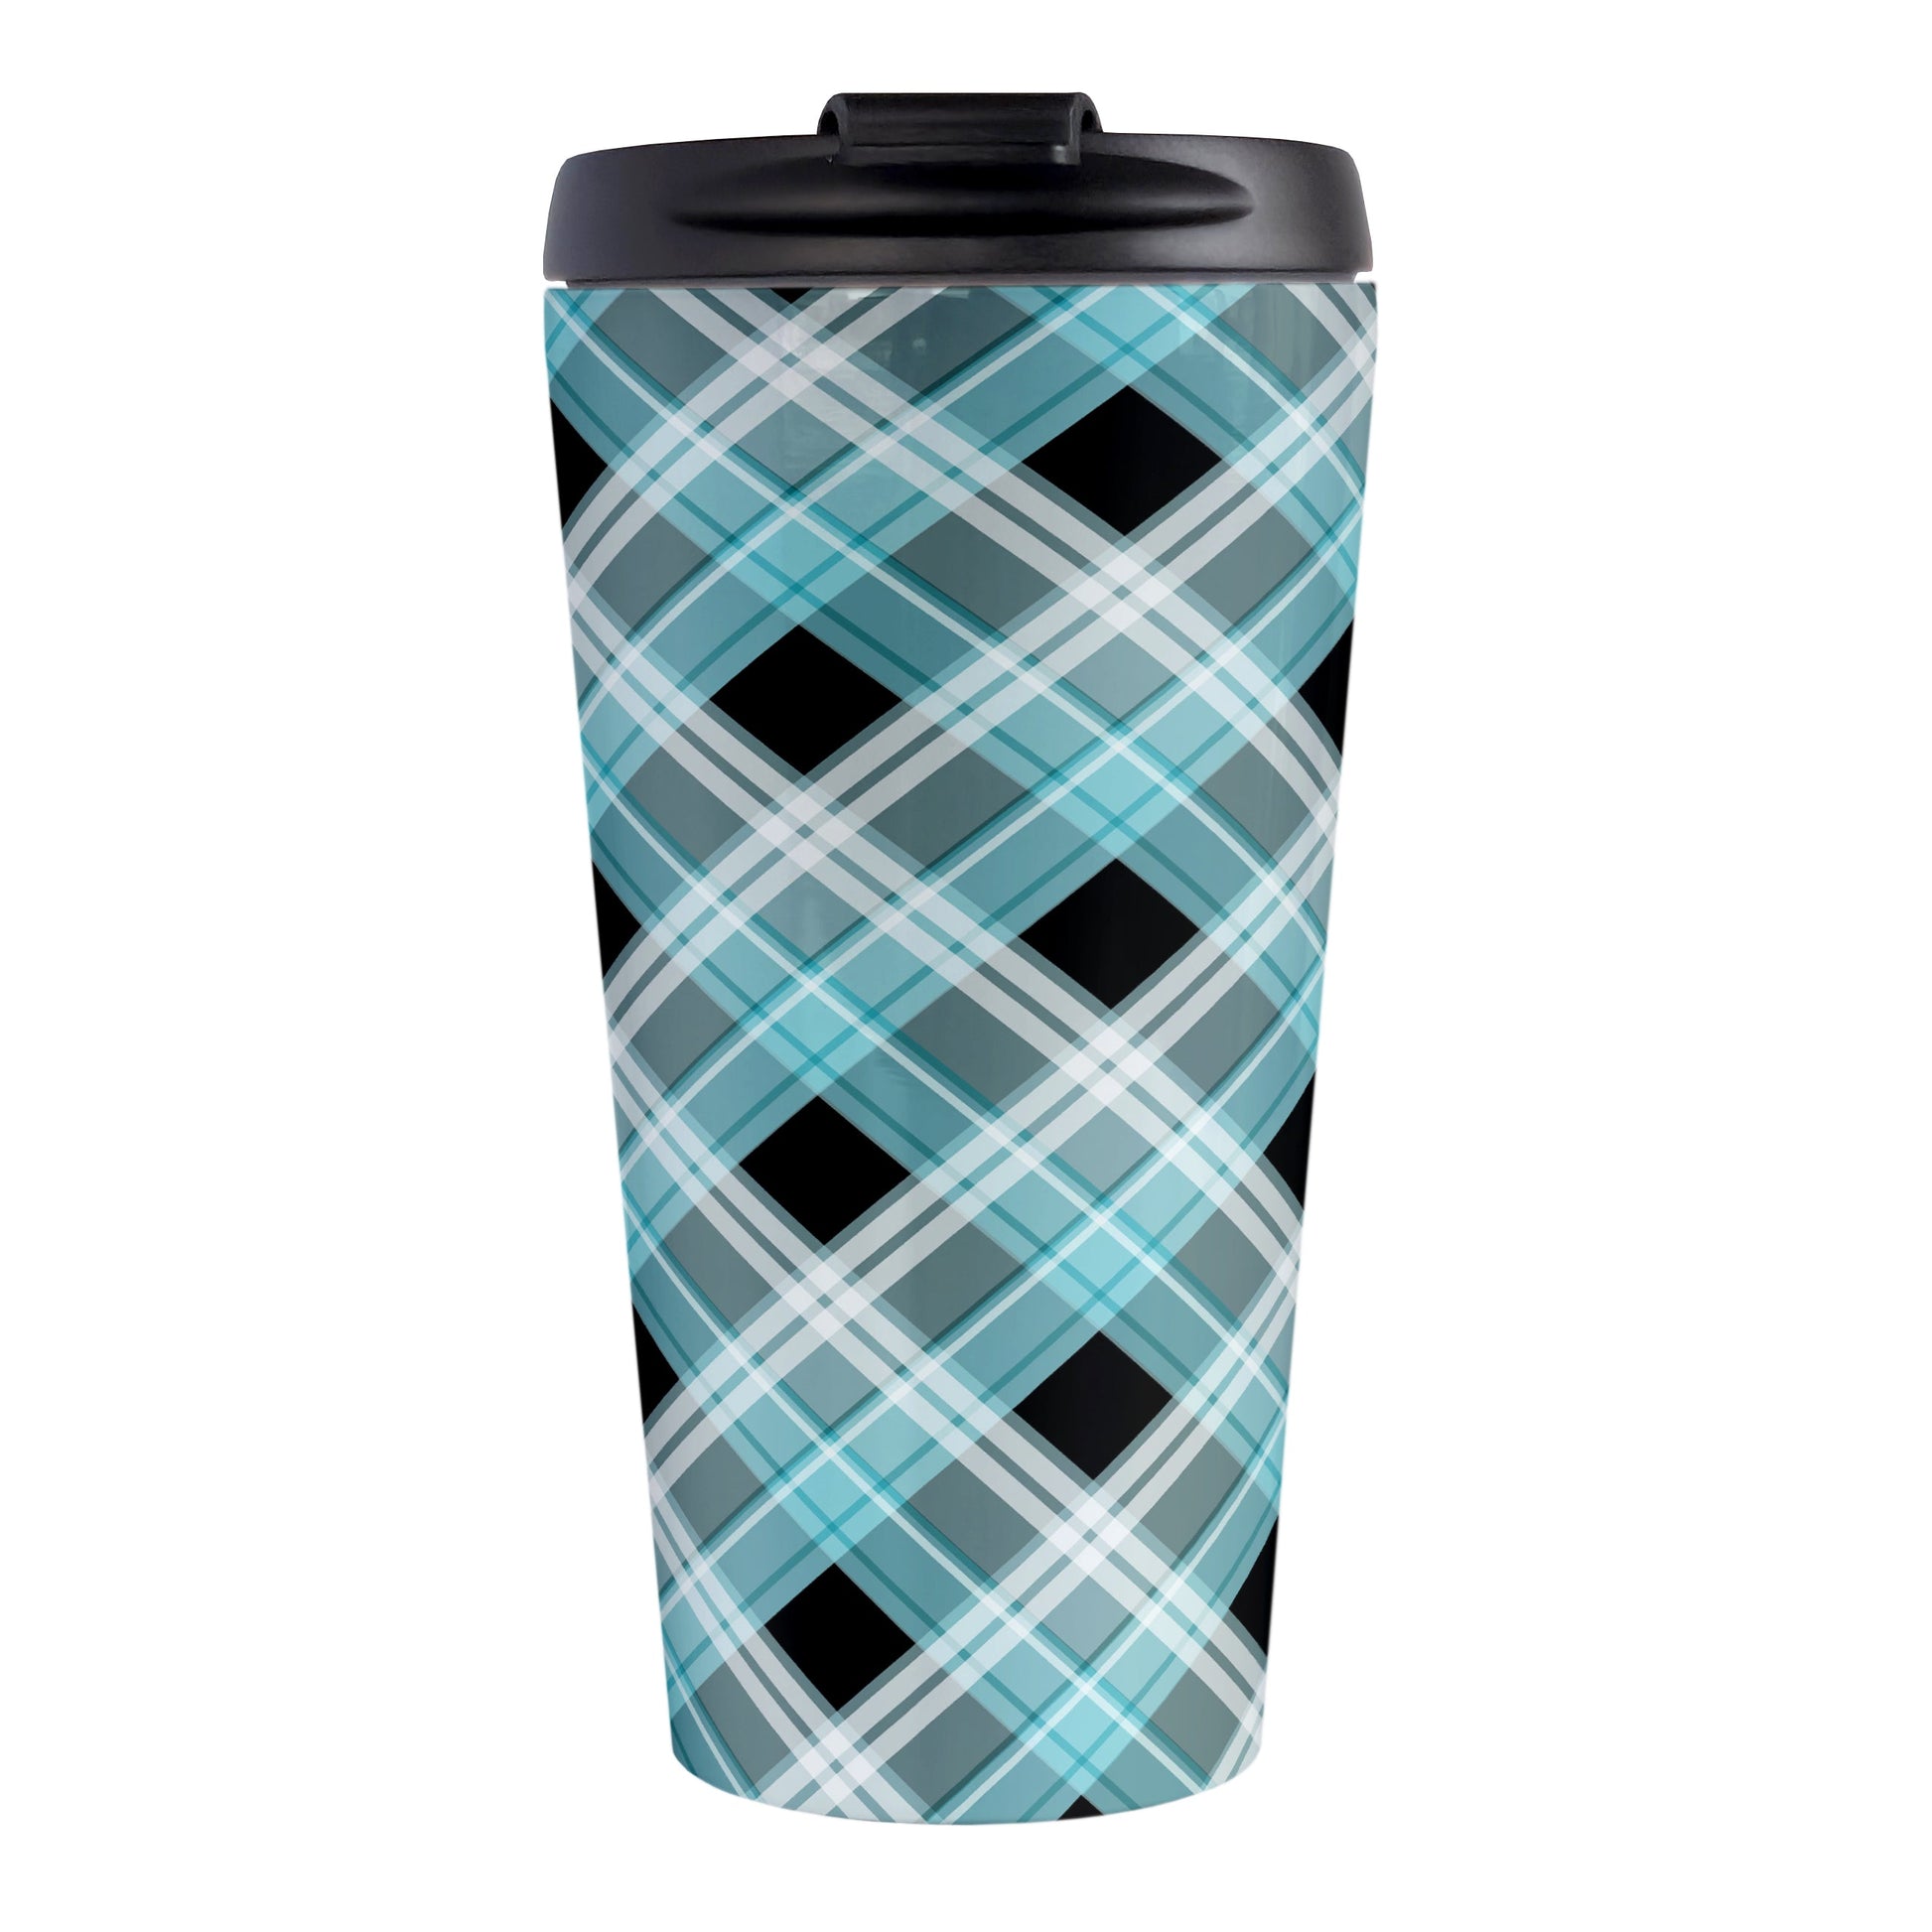 Alternative Turquoise Plaid Travel Mug (15oz) at Amy's Coffee Mugs. A stainless steel travel mug designed with a diagonal turquoise, black, and white plaid pattern that wraps around the mug. Designed for someone who likes plaid patterns and loves the color turquoise.